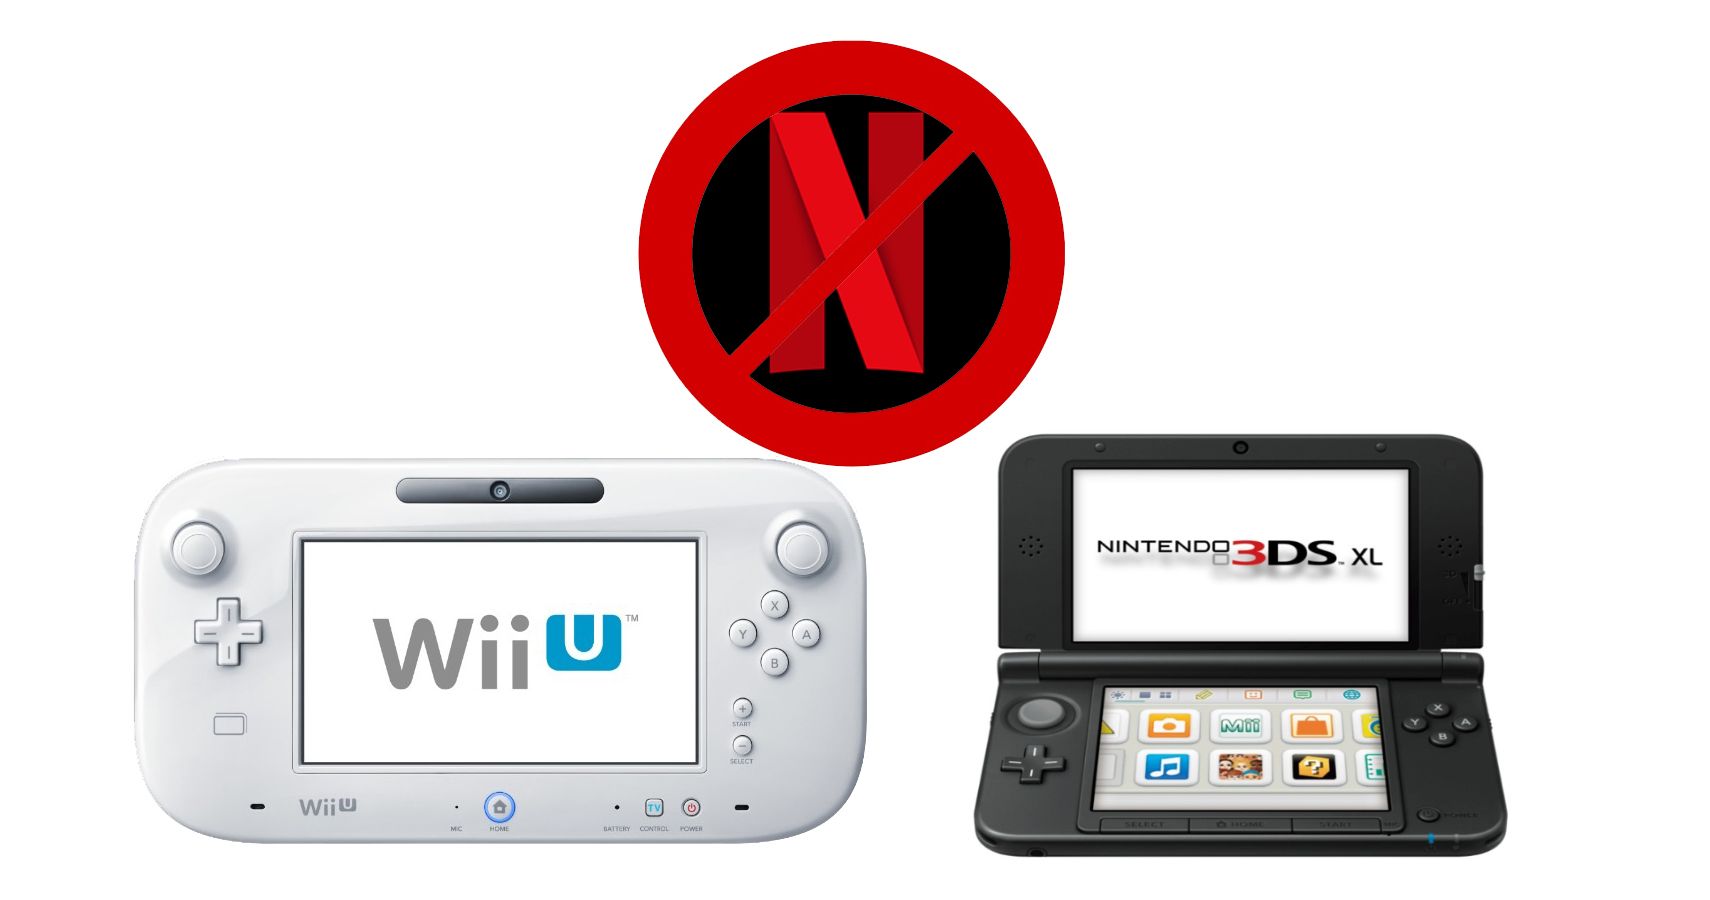 Tussendoortje seks Dor Netflix Is Being Removed From The 3DS And Wii U eShops, Still Not On Switch